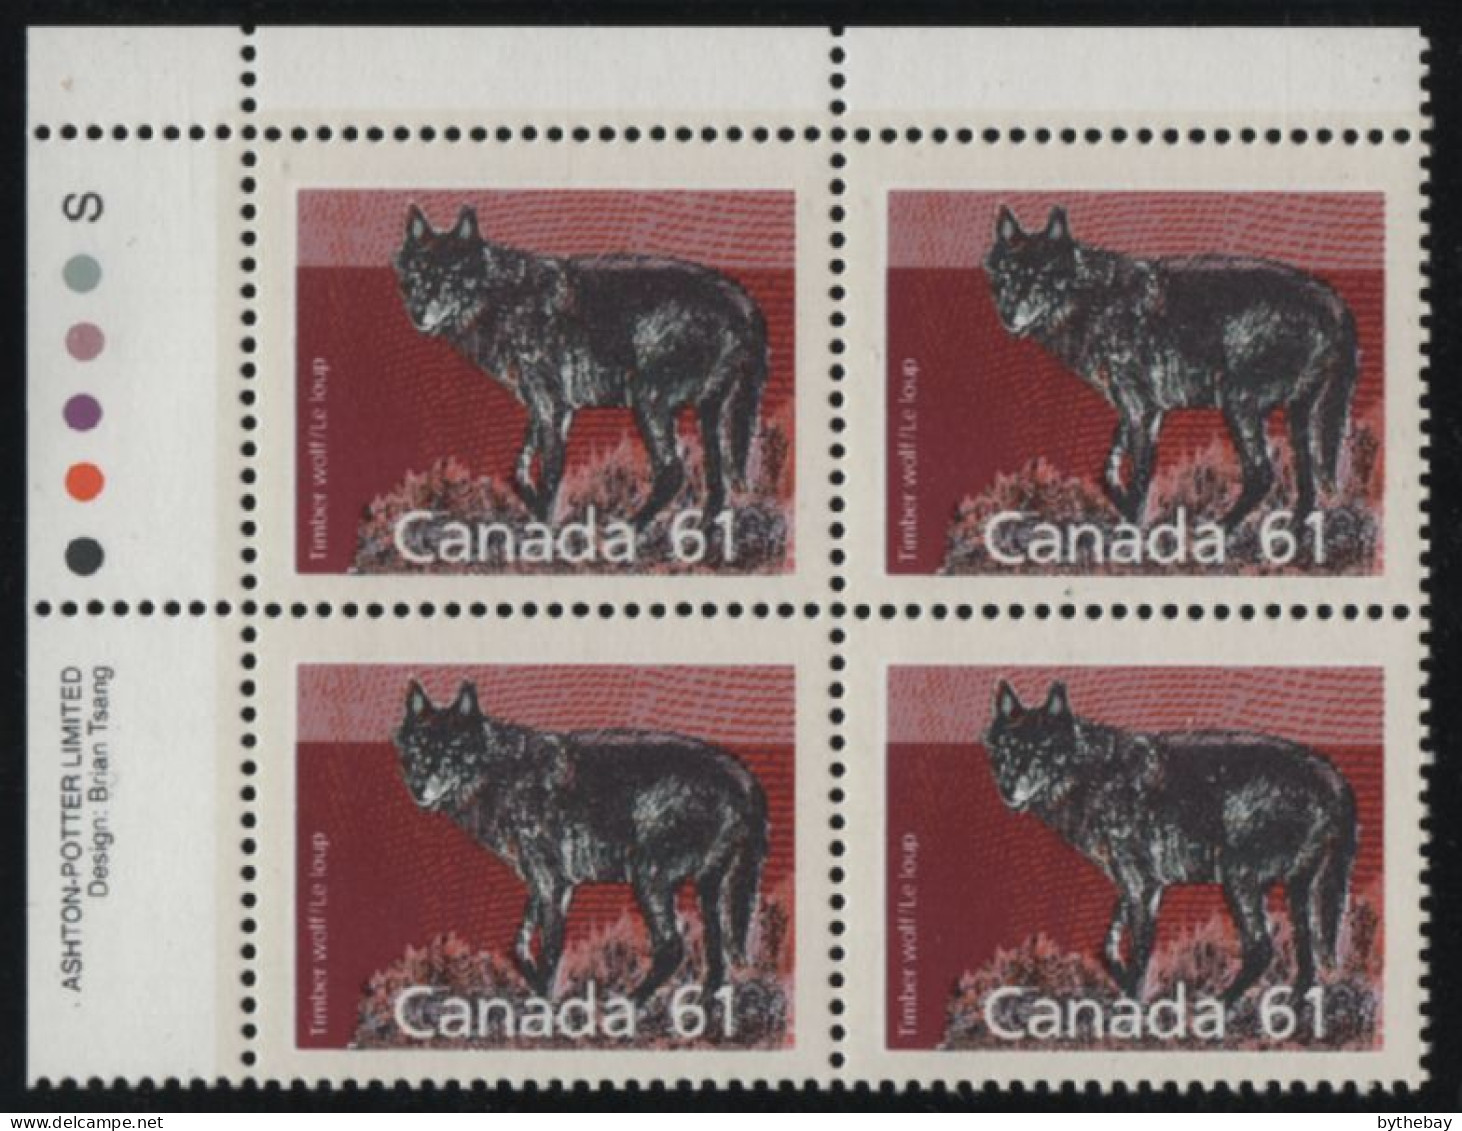 Canada 1988-92 MNH Sc 1175 61c Timber Wolf UL Plate Block - Plate Number & Inscriptions